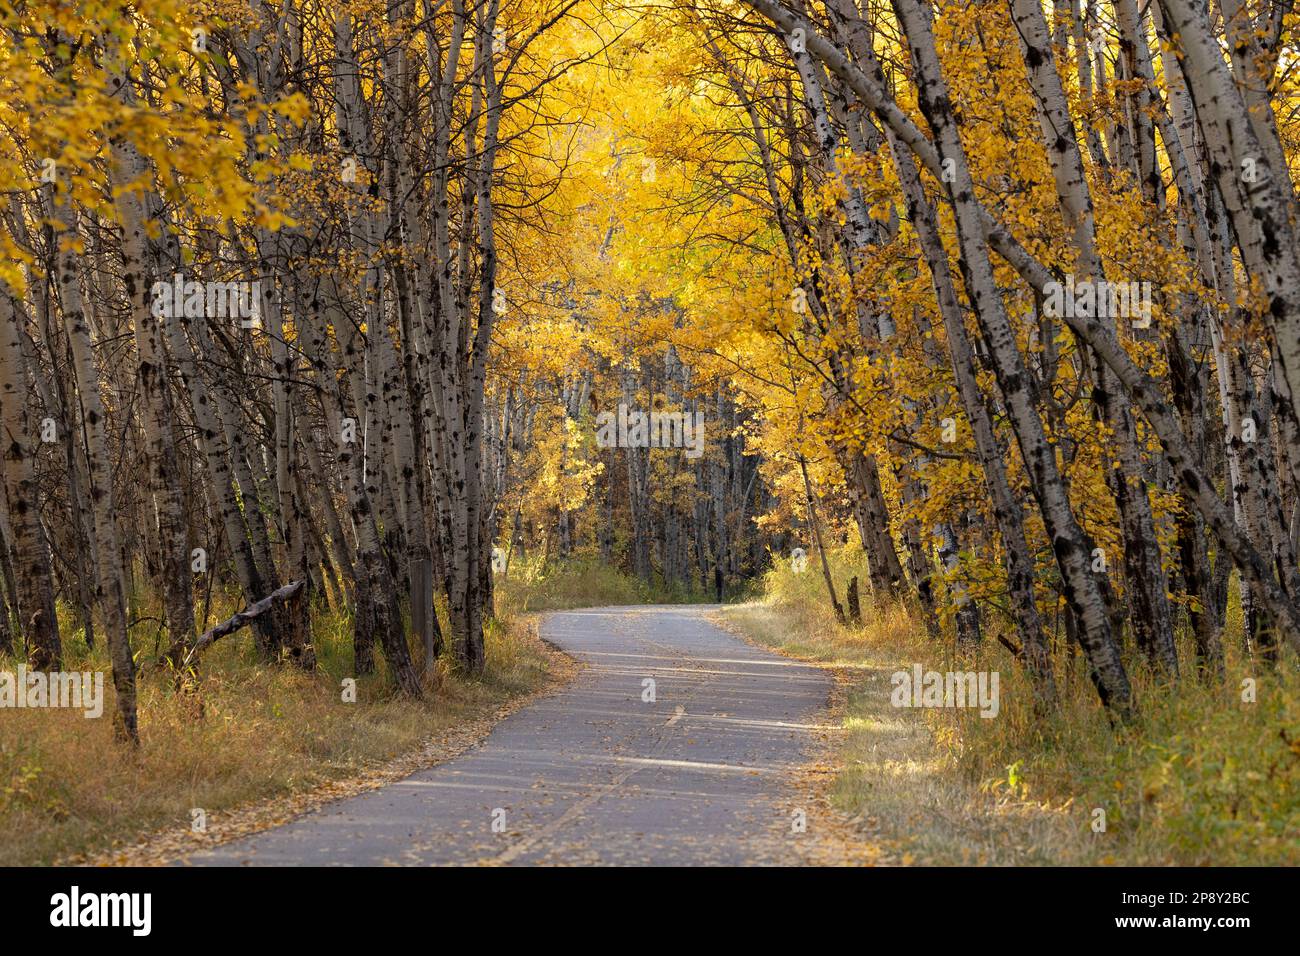 Calgary, Alberta, Canada - Paved path through an aspen forest with autumn colors in South Glenmore Park Stock Photo